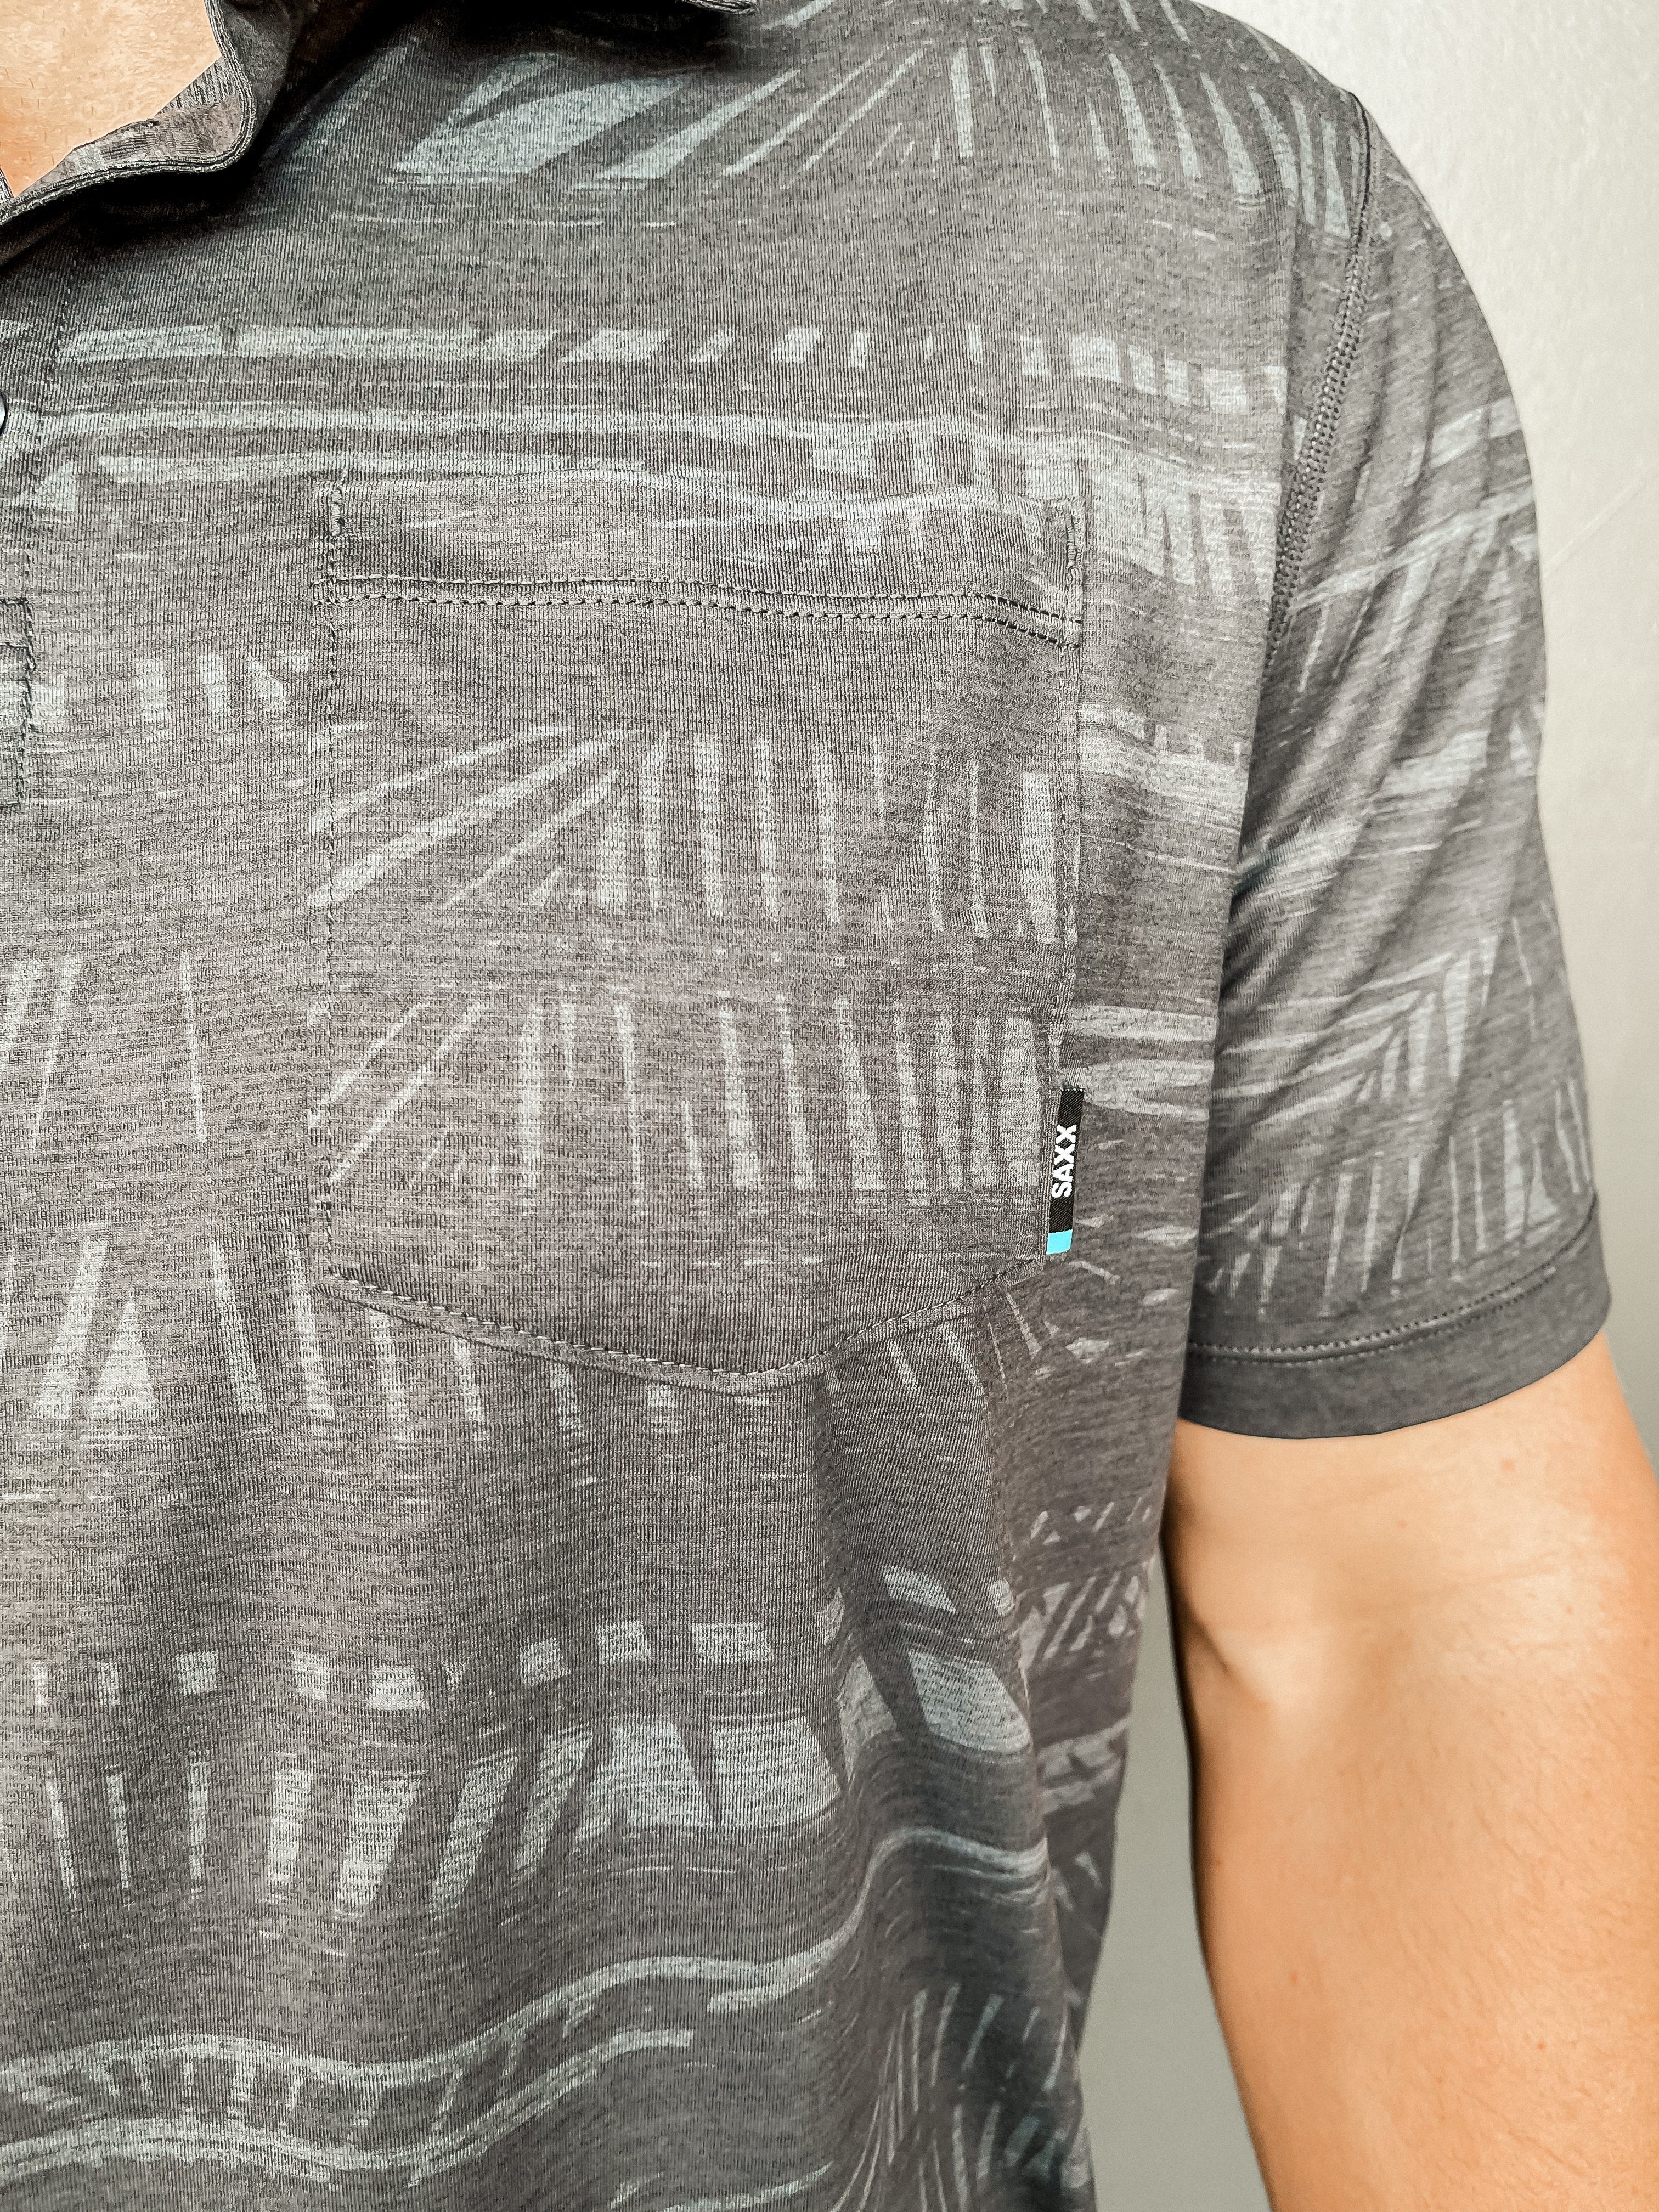 Droptemp Printed All Day Cooling Polo - Shade Stripe Turbulence